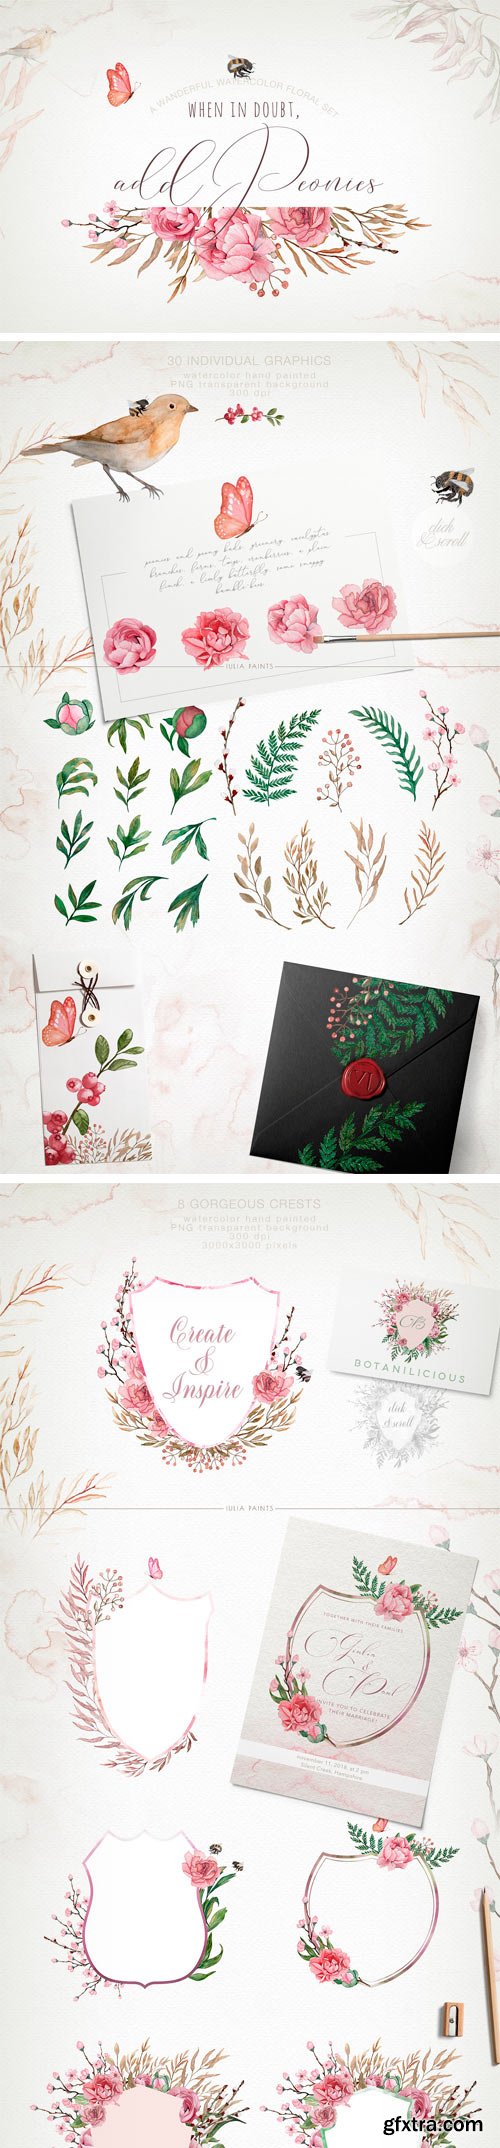 CM - Add Peonies - Watercolor Graphic Set 1868042